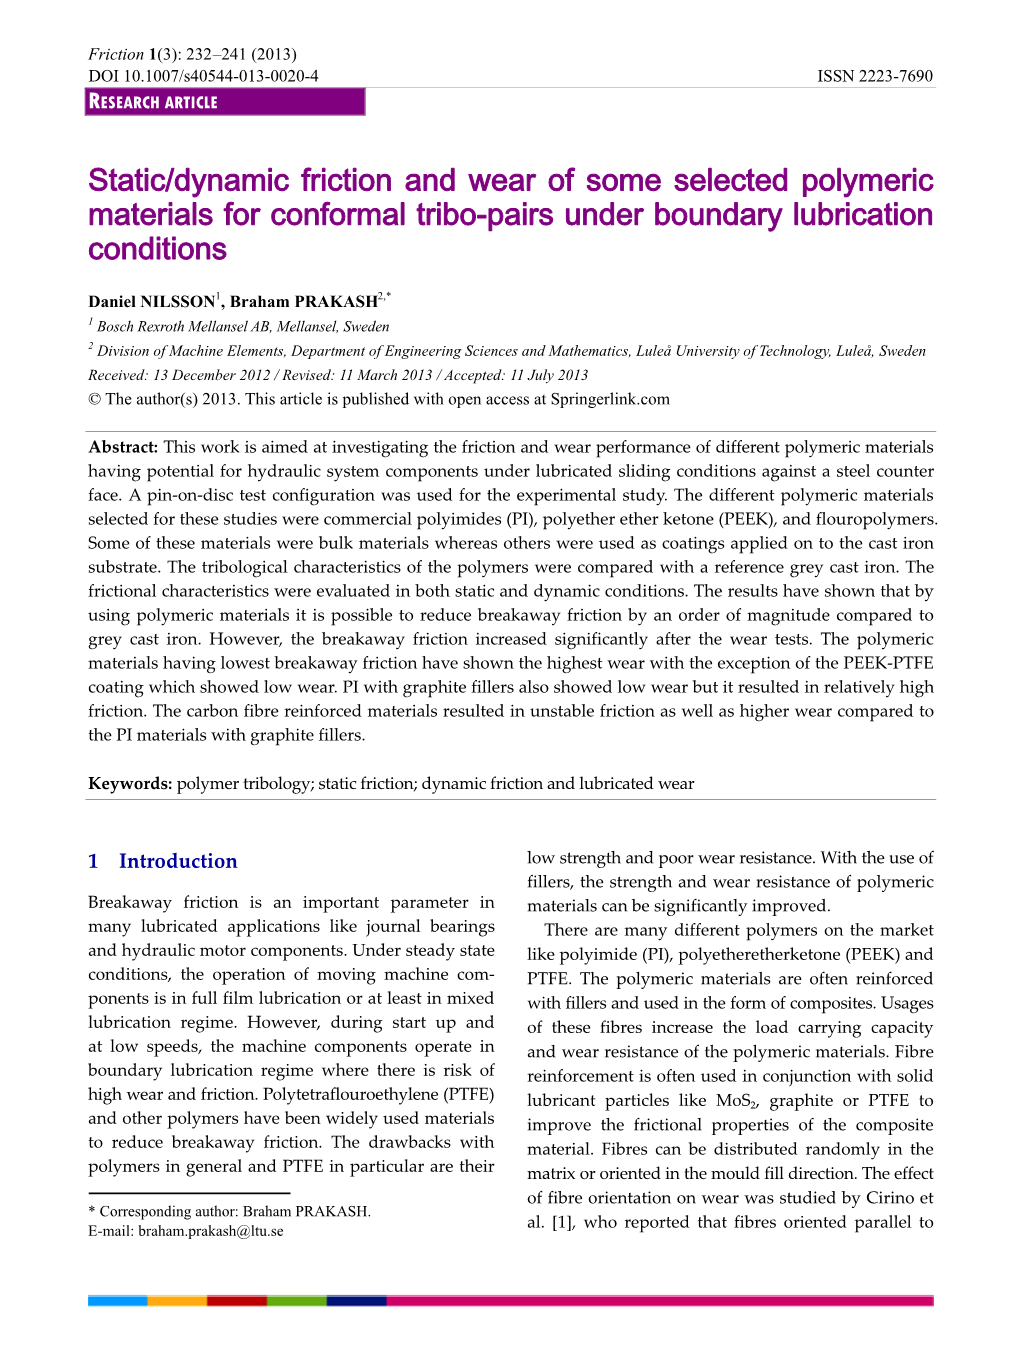 Static/Dynamic Friction and Wear of Some Selected Polymeric Materials for Conformal Tribo-Pairs Under Boundary Lubrication Conditions